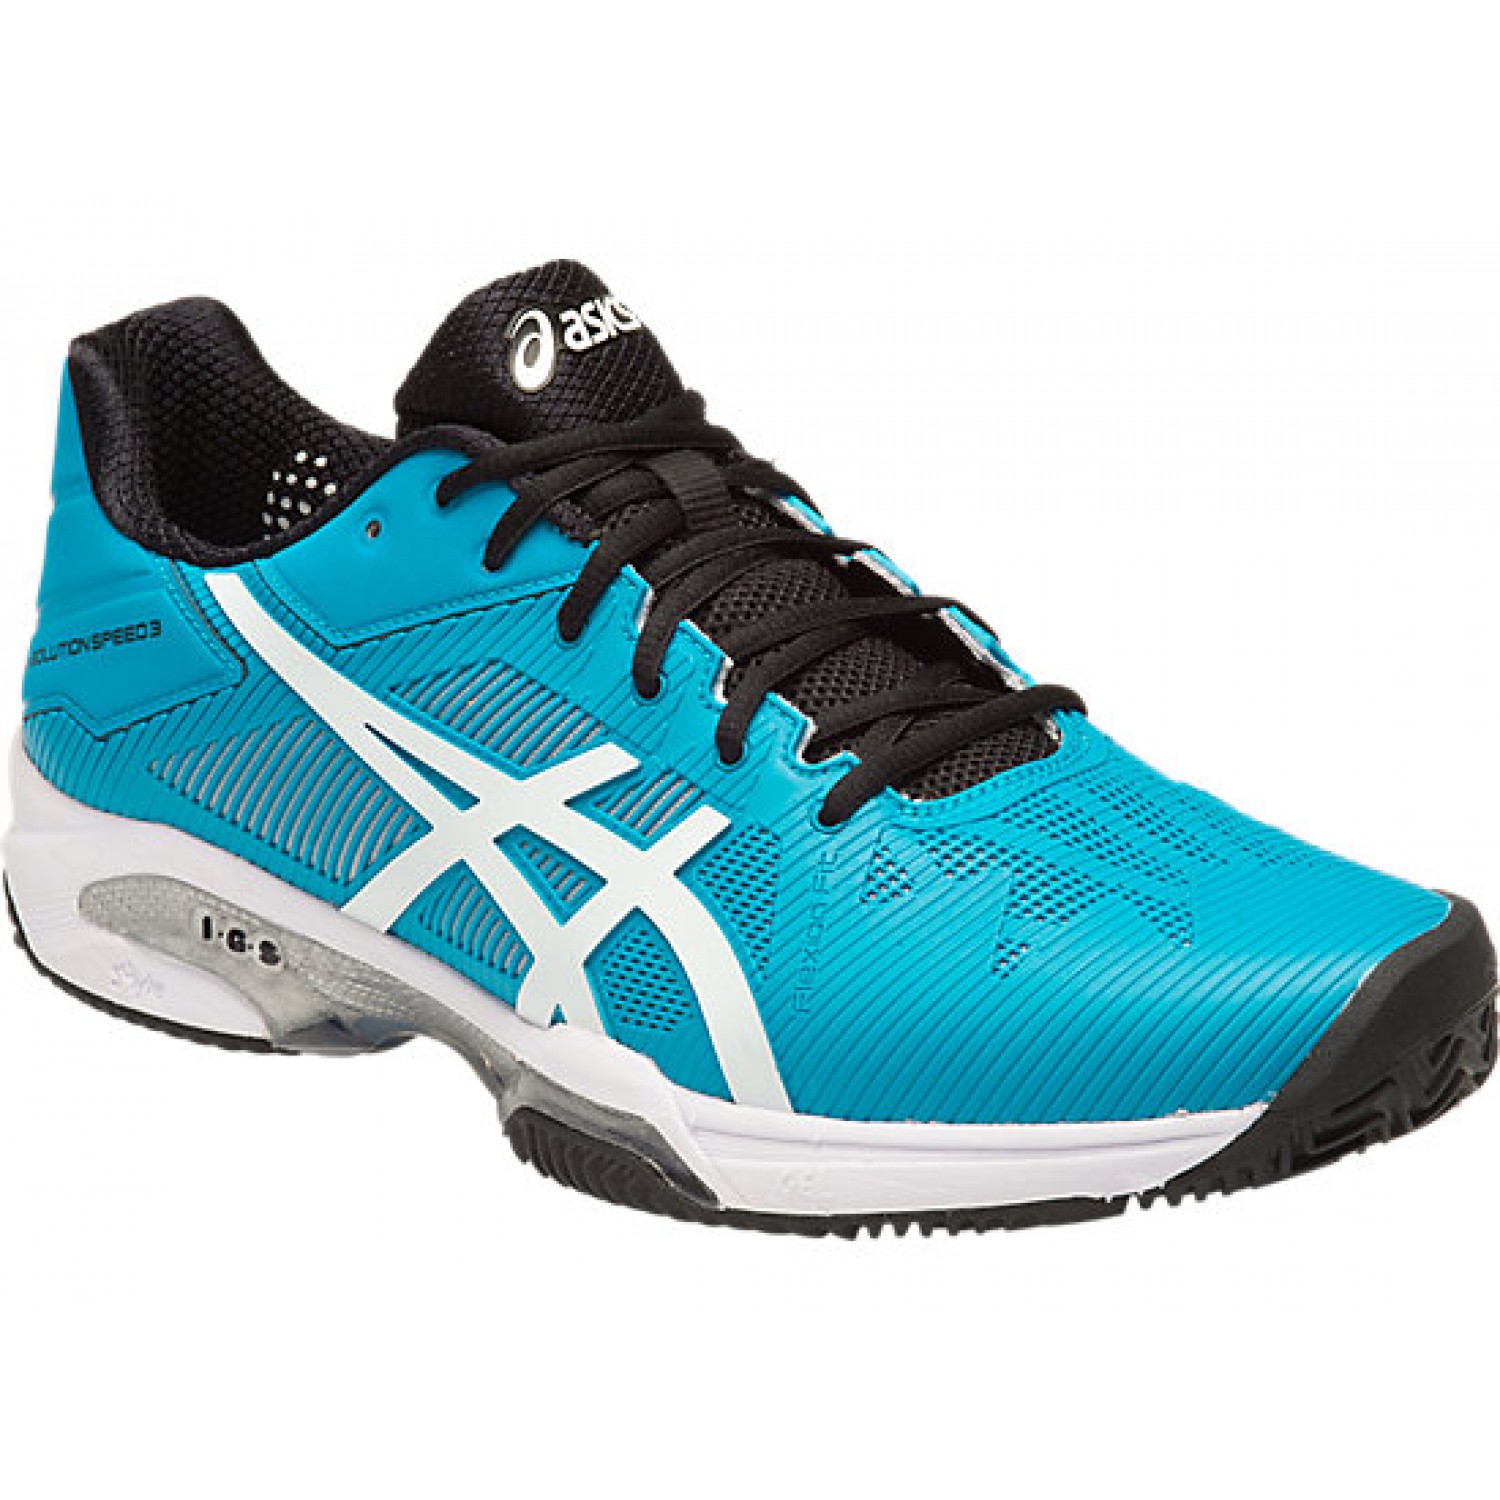 Asics Gel-Solution Speed 3 Review 